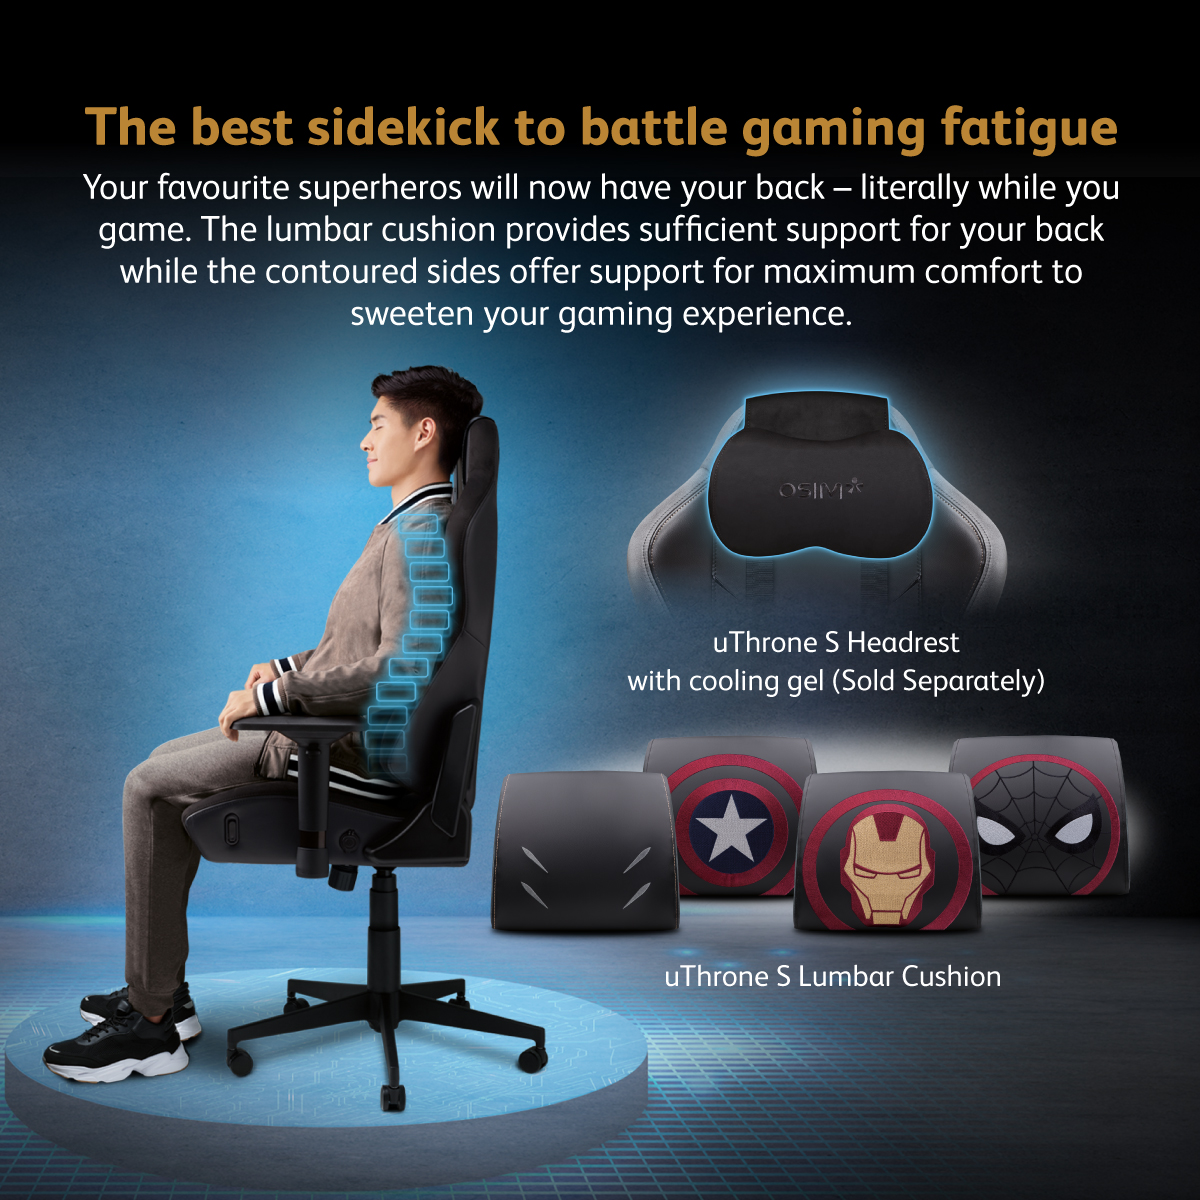 OSIM uThrone S (Black) Gaming Chair with Customisable Massage - Self Assembled 